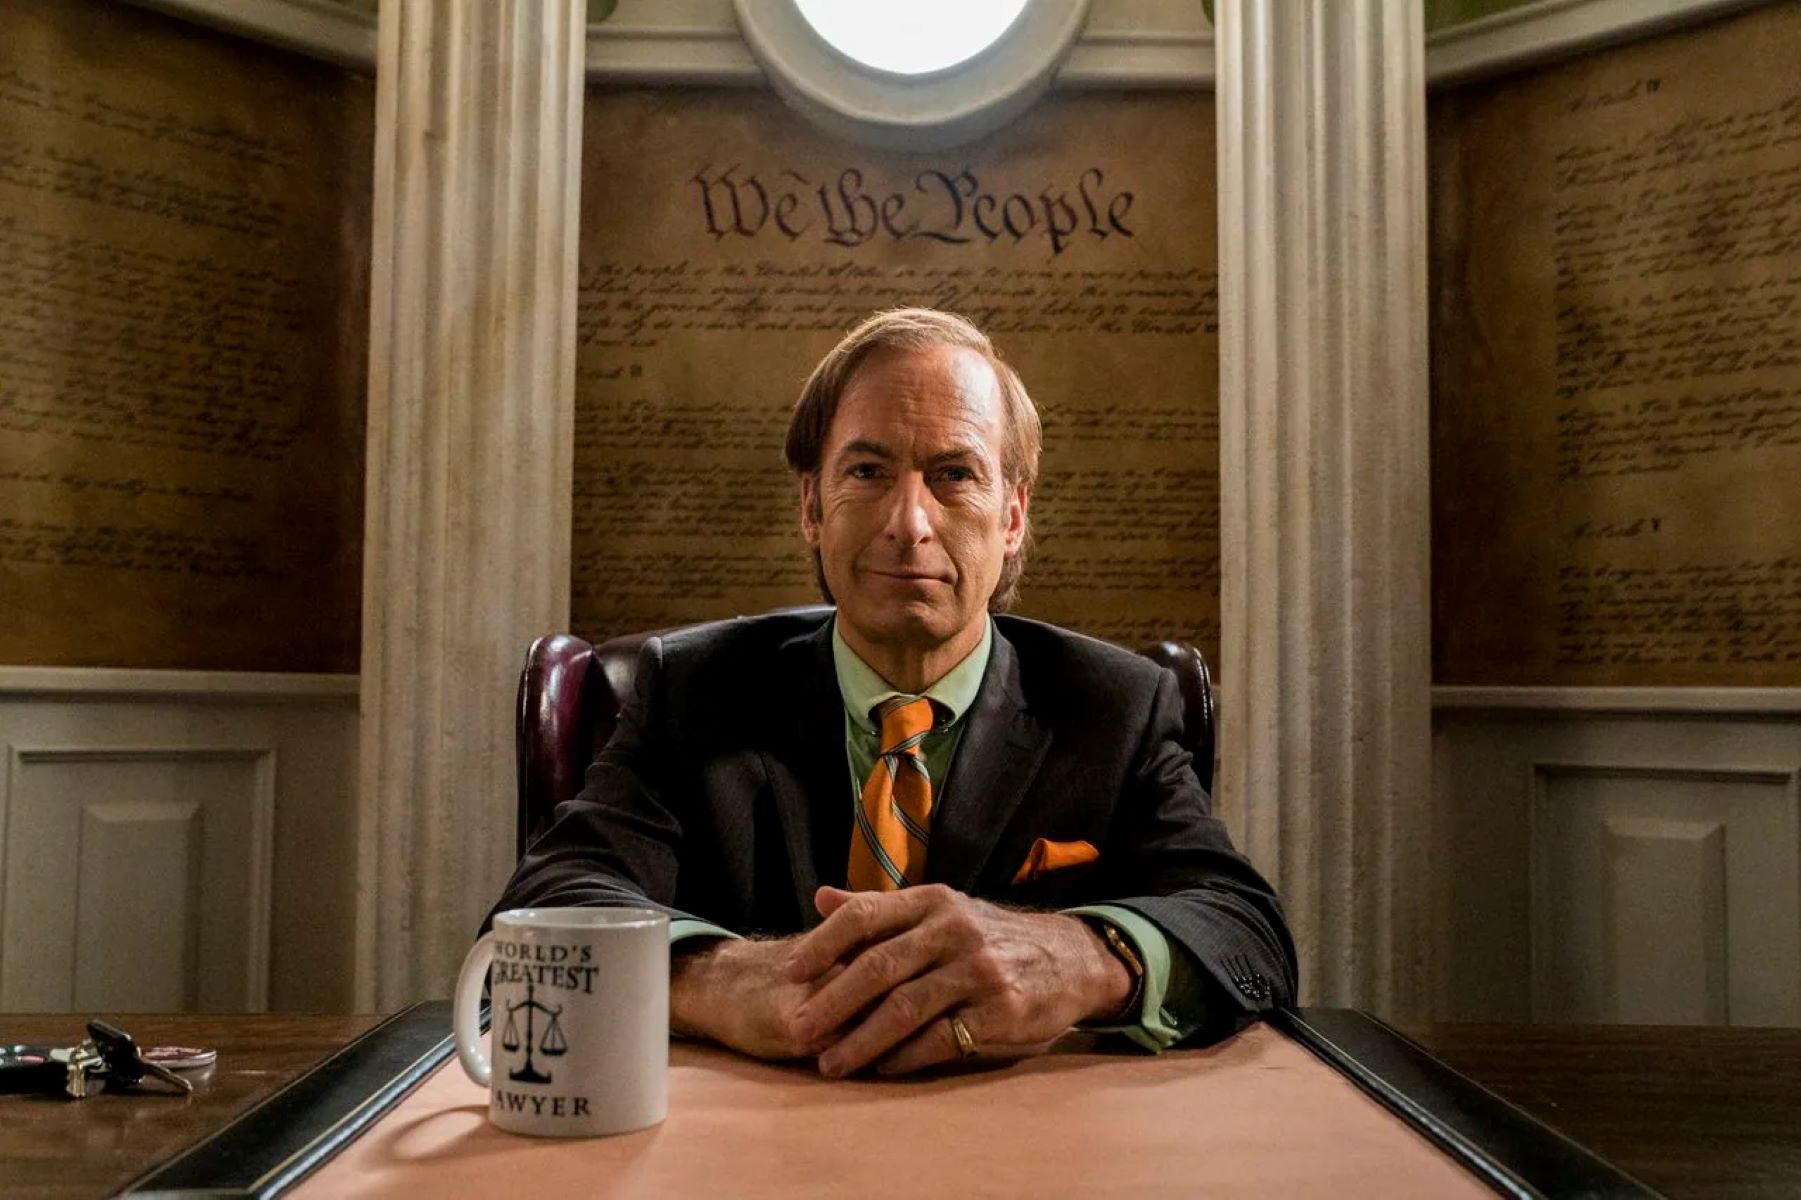 How To Watch New Episodes Of Better Call Saul